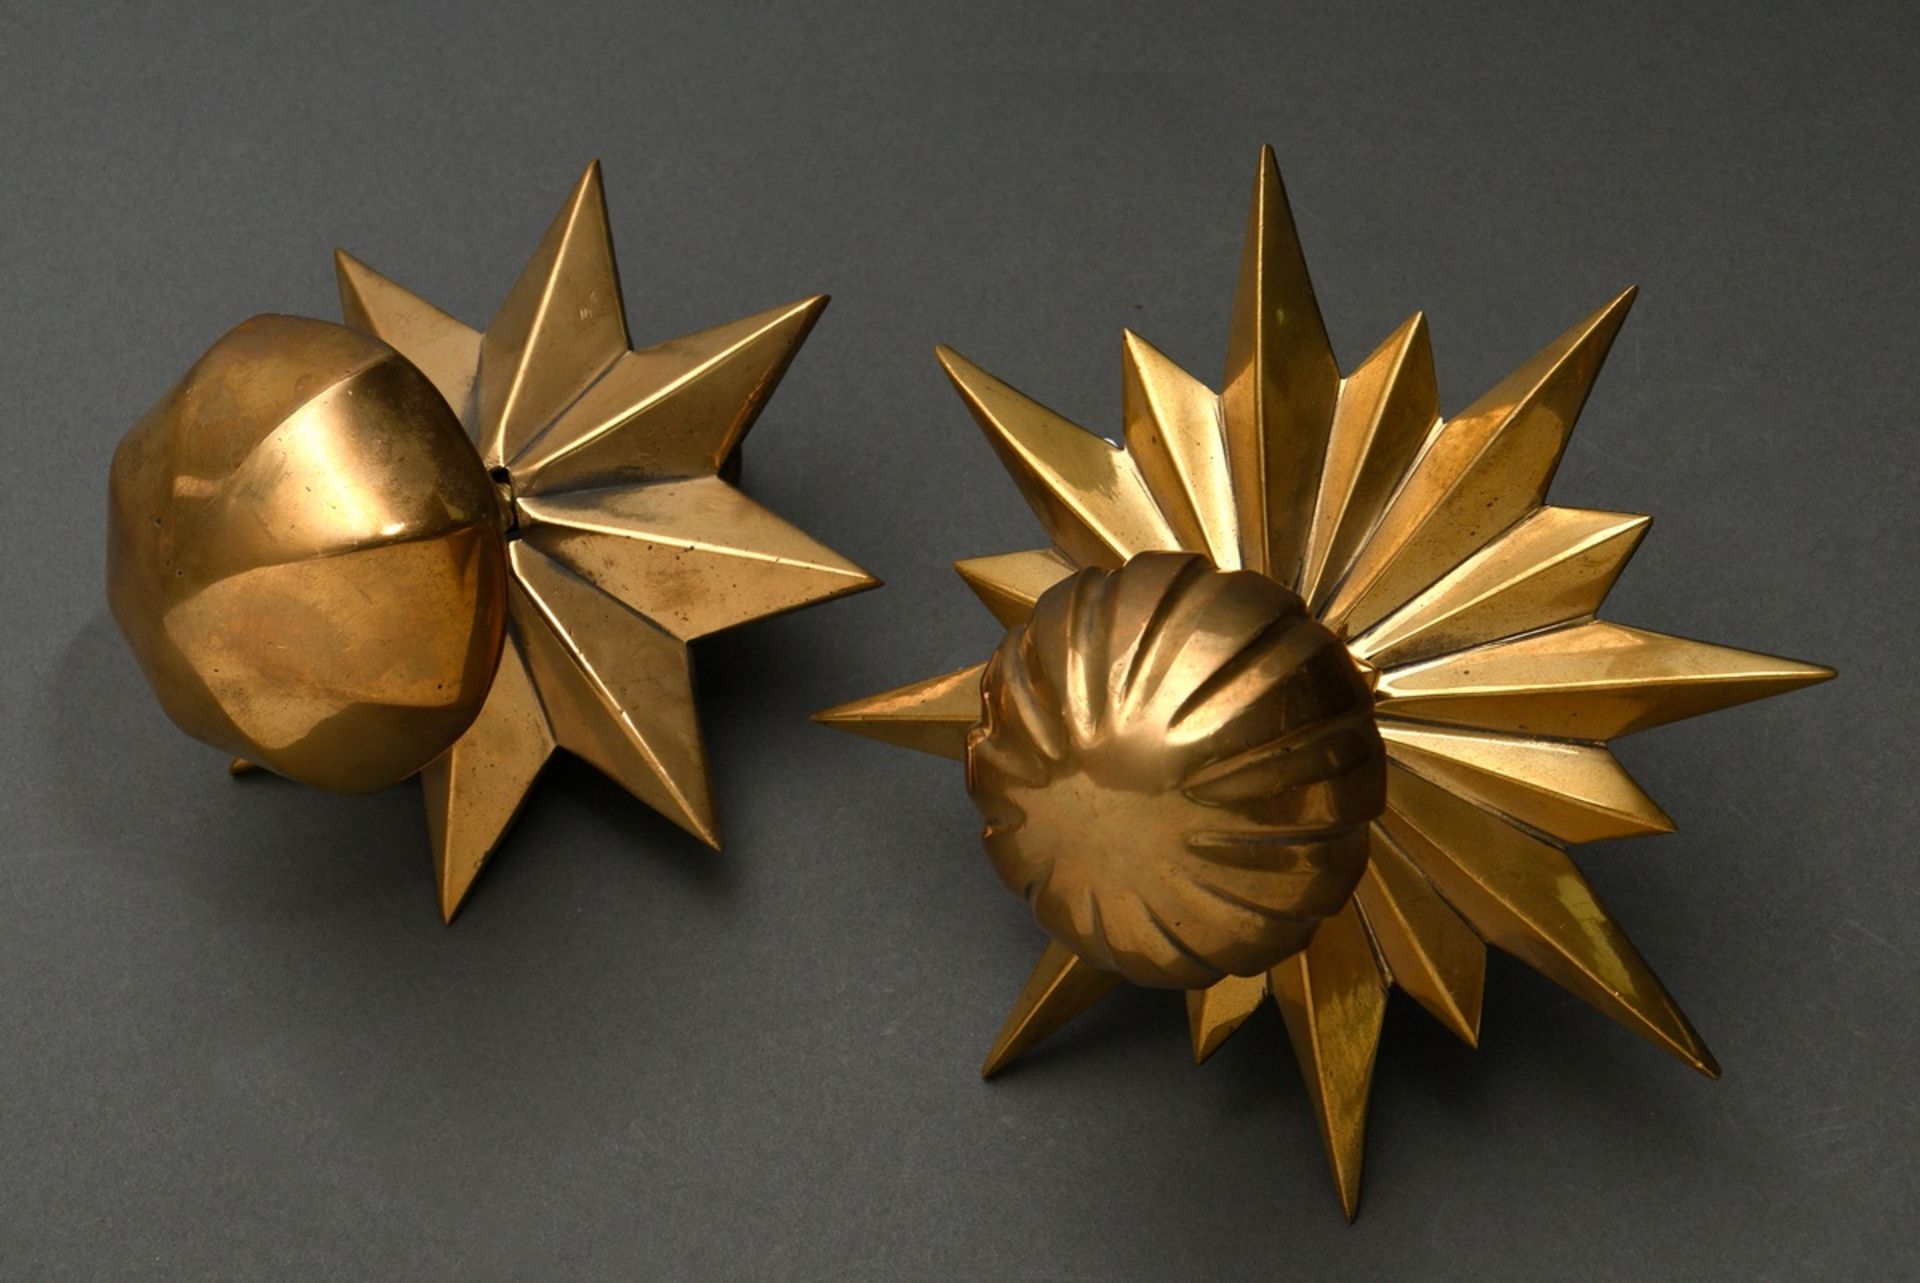 2 Various English brass door knobs with star-shaped mounts, c. 1900, Ø 14.5/18.5cm - Image 3 of 3